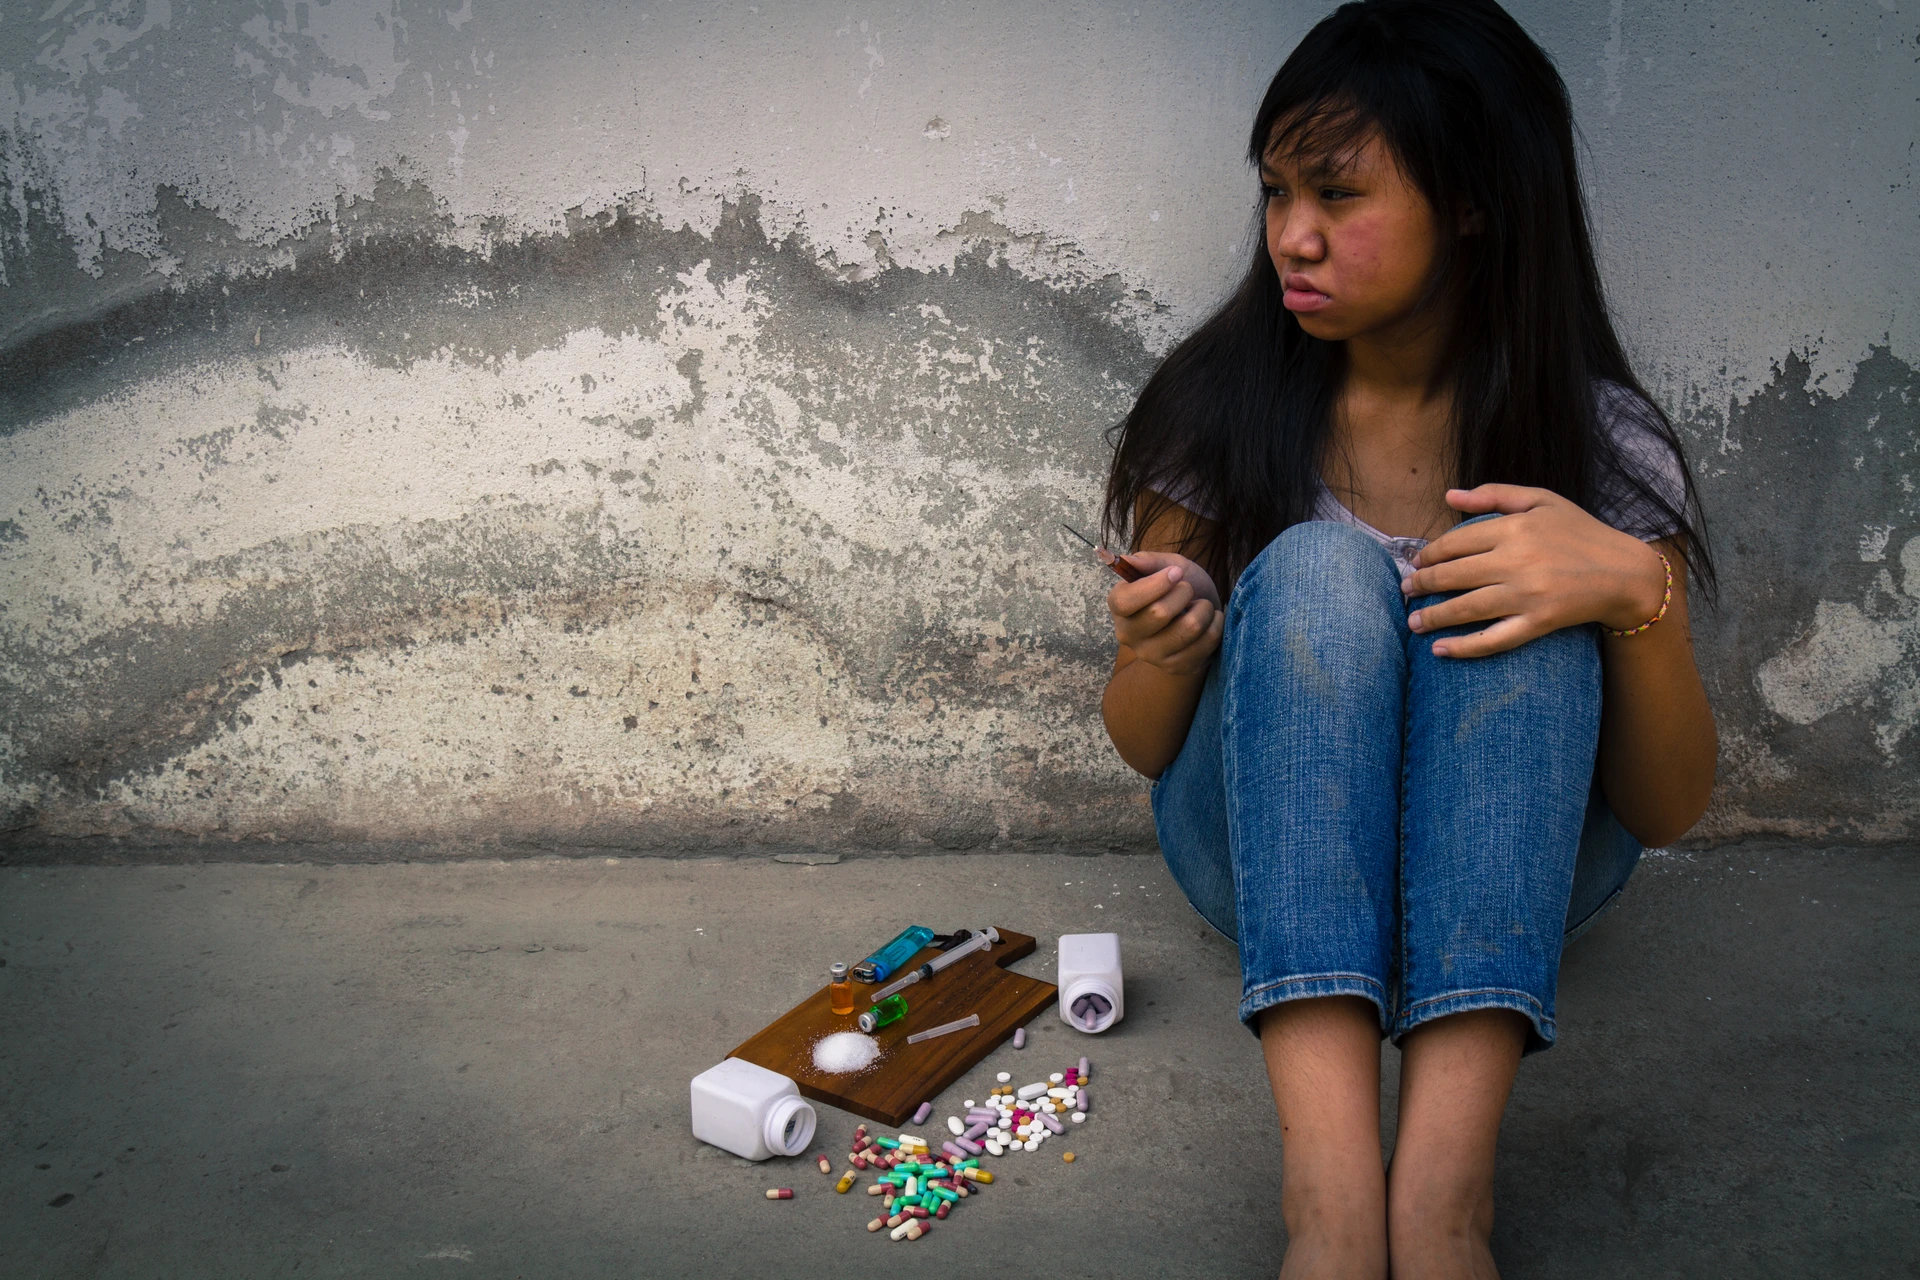 Adolescent substance use